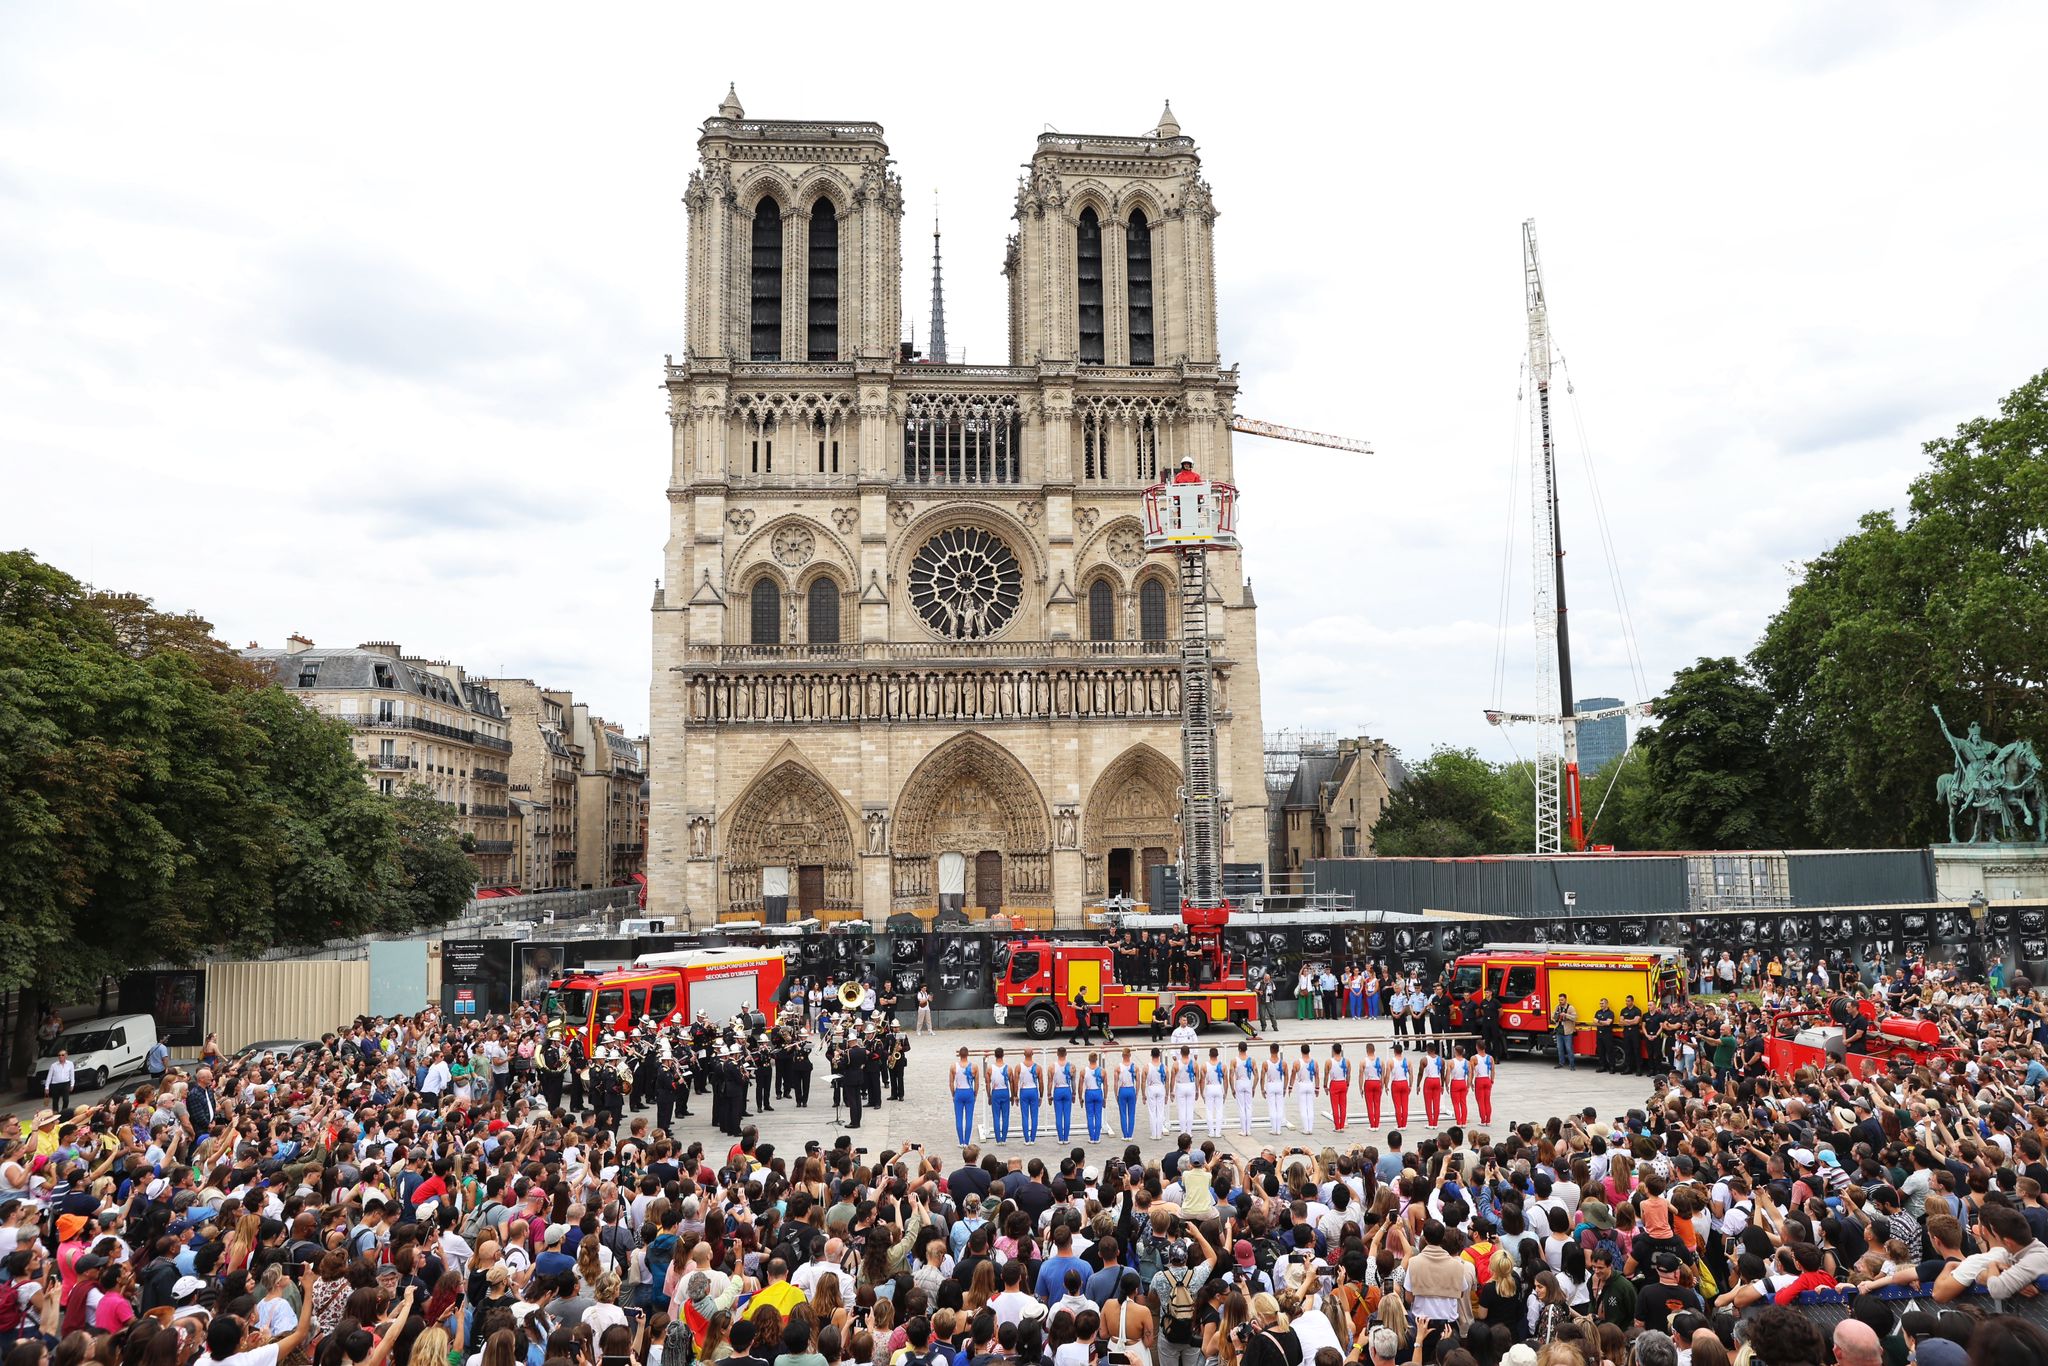 For the flame's passage through Notre-Dame, the Paris Fire Brigade's gymnastics section treated spectators to an artistic and sporting performance.